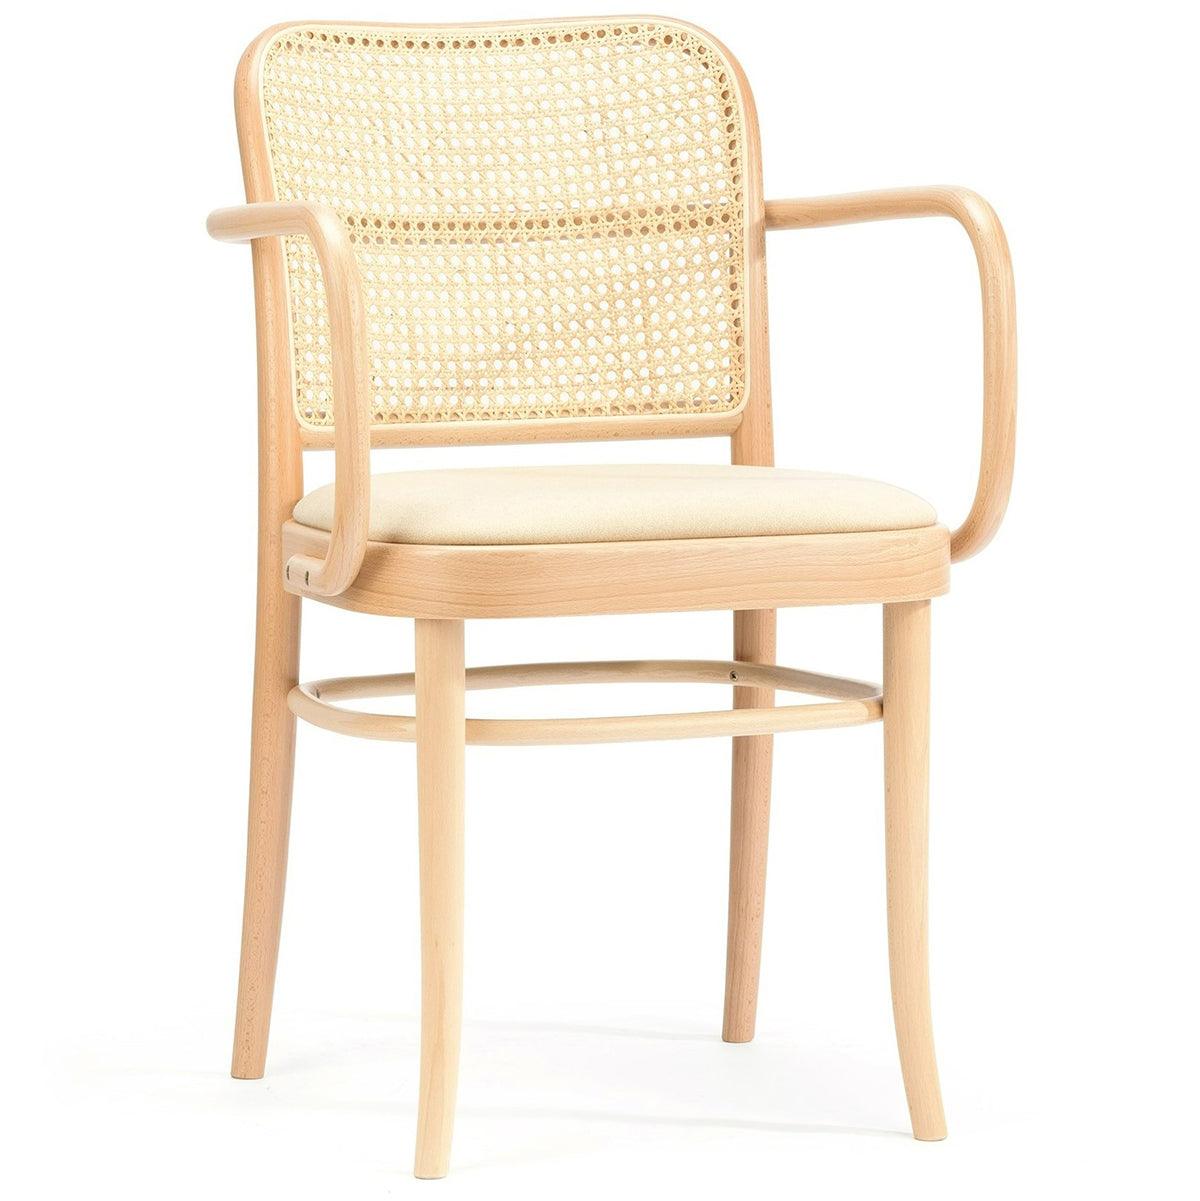 811 Upholstered Seat Cane/Mesh Back Armchair - WOO .Design